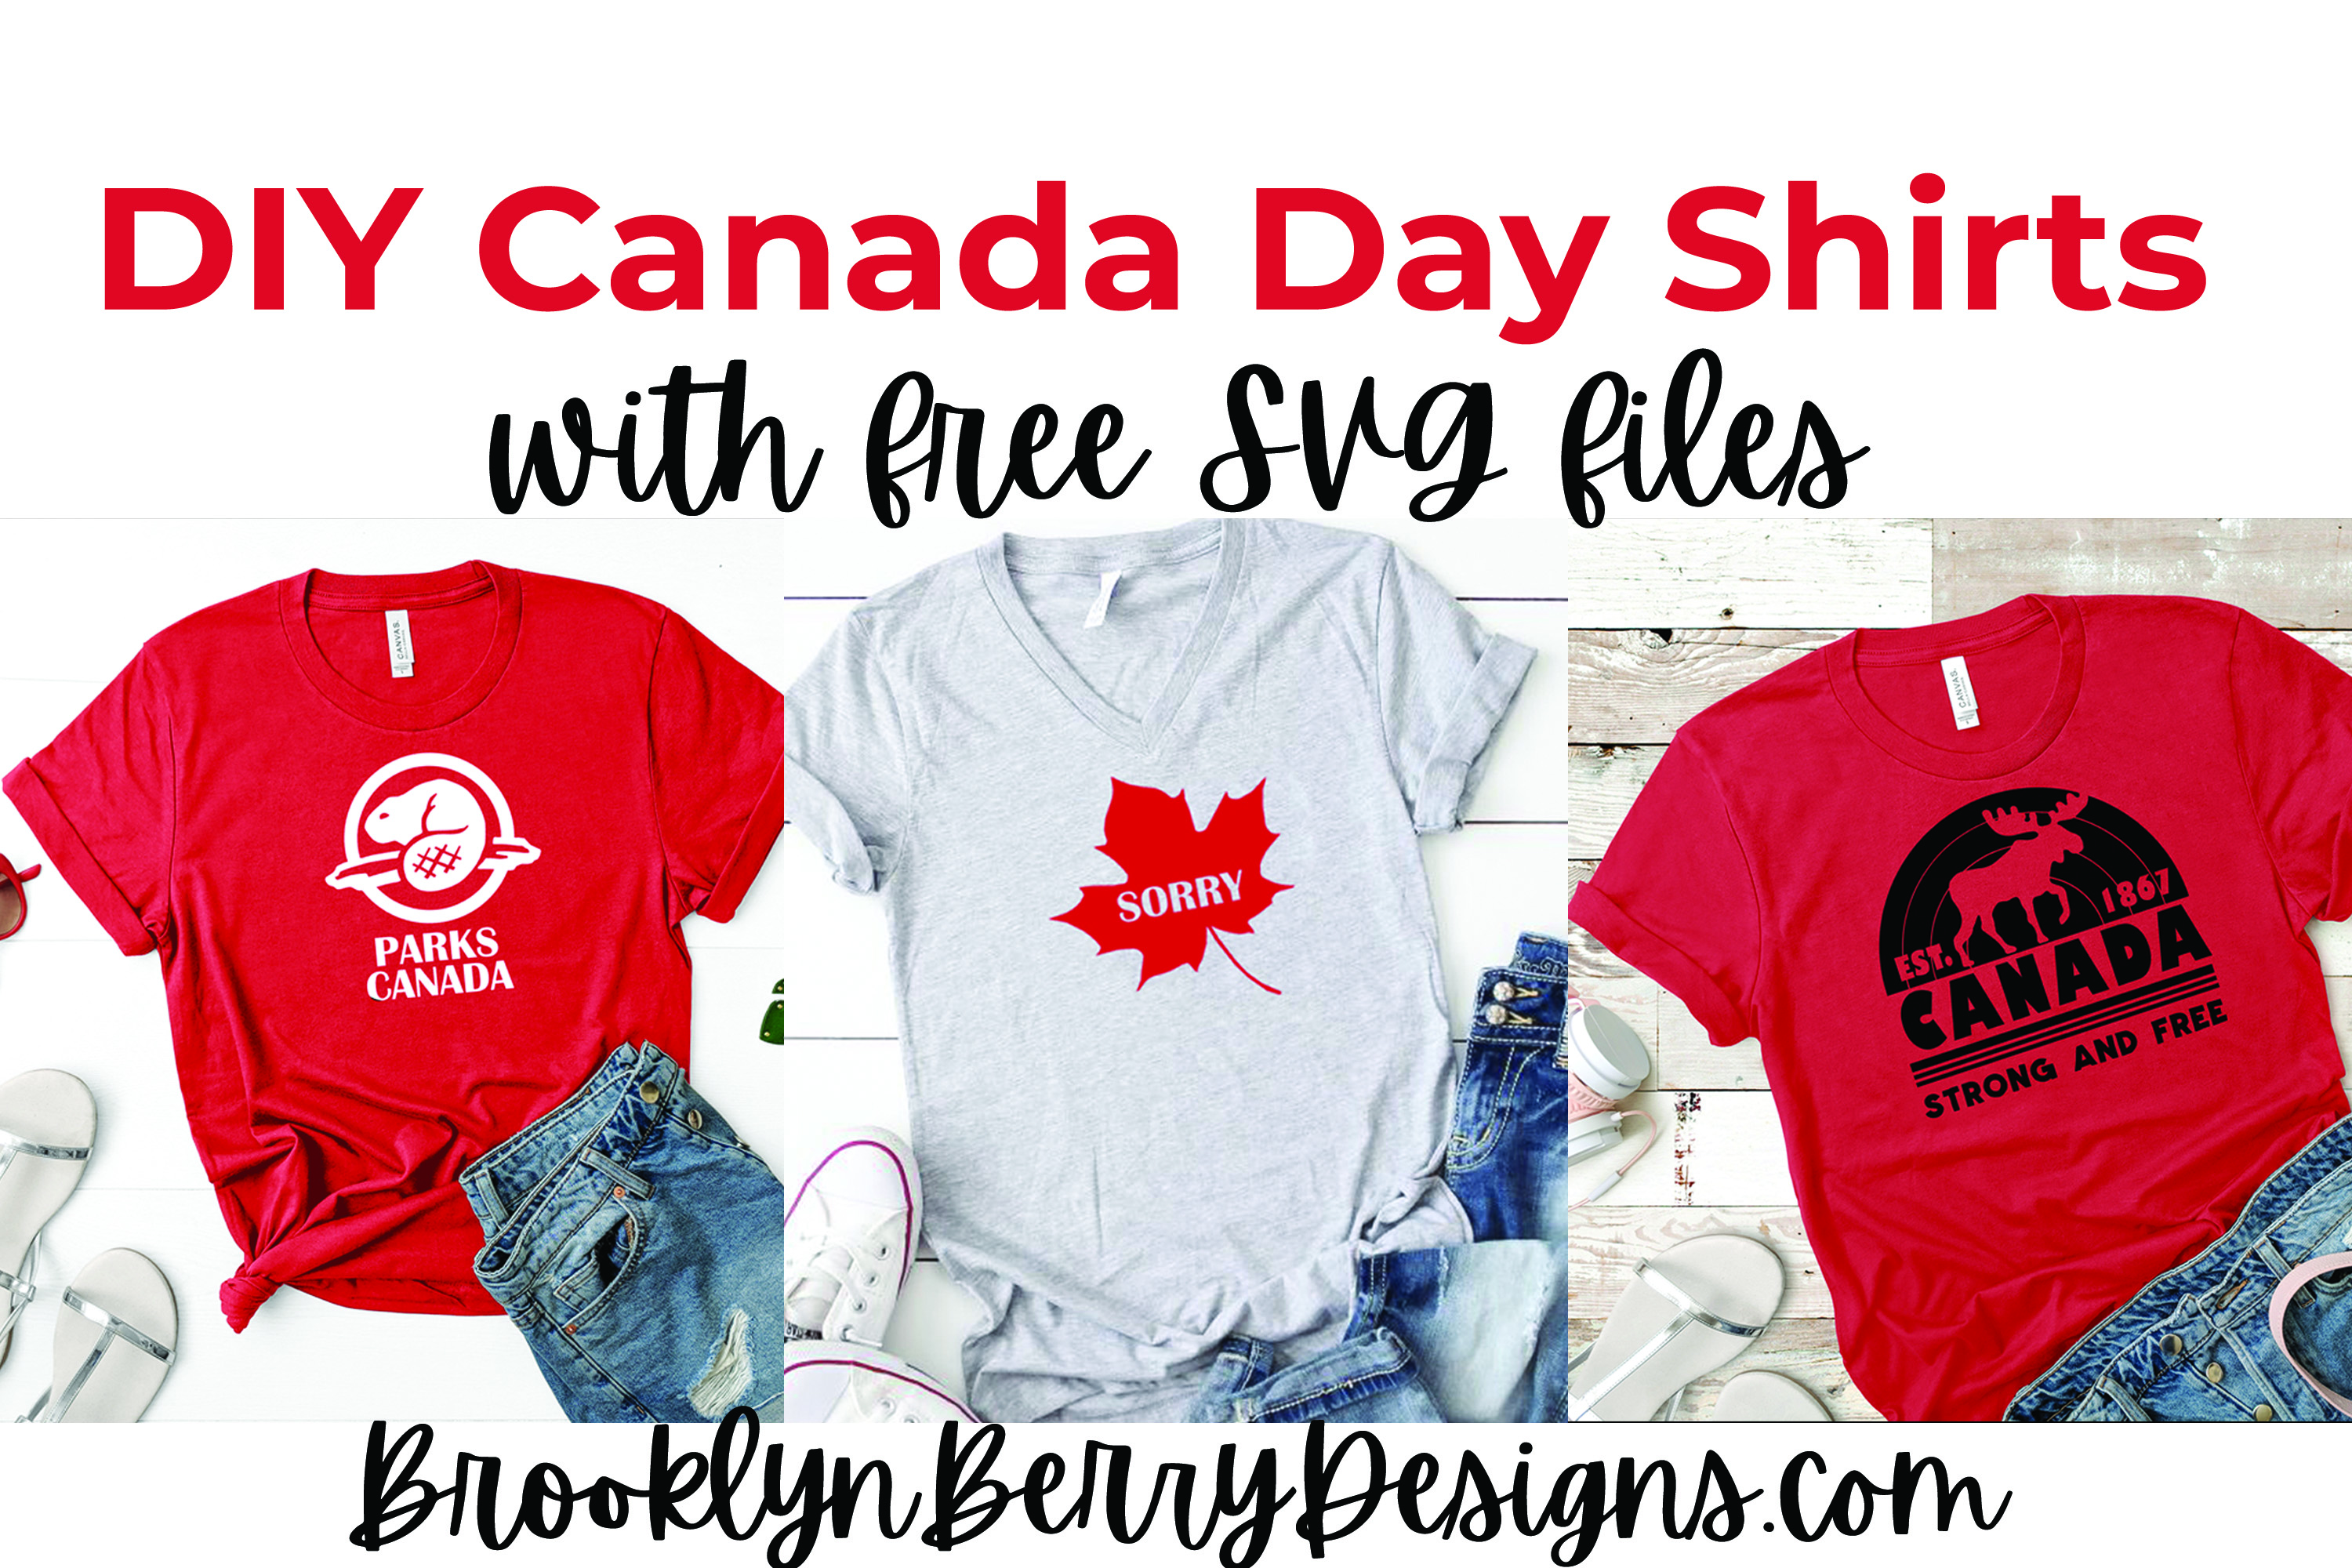 Make your own DIY Canada Day Shirts with these 3 free svg files from Brooklyn Berry Designs